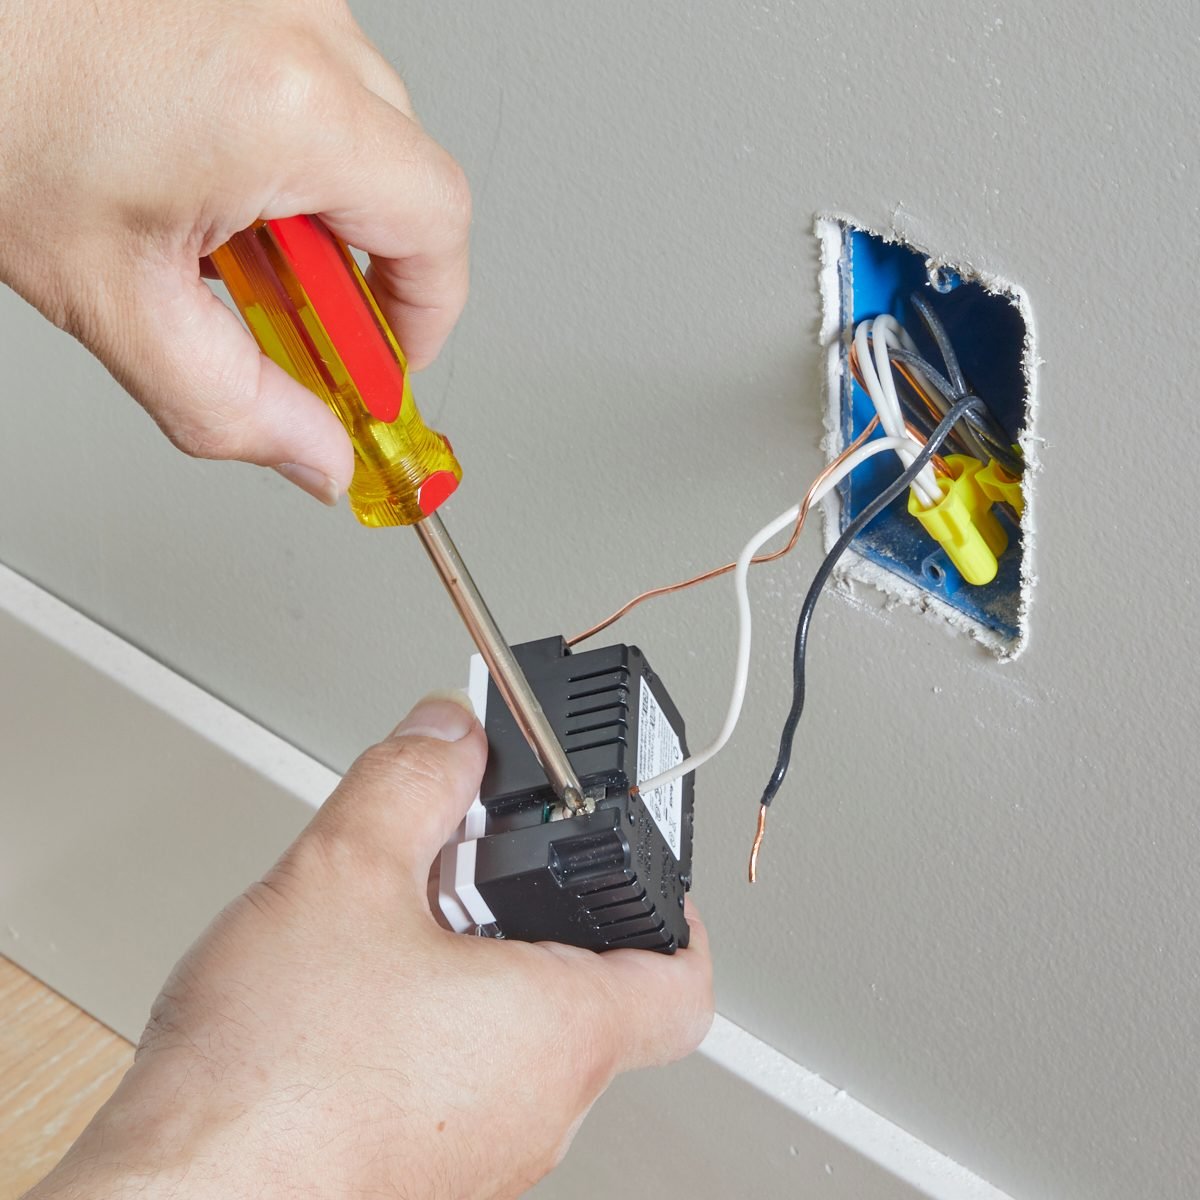 Electrical Wiring Types, Sizes and Installation | Family Handyman